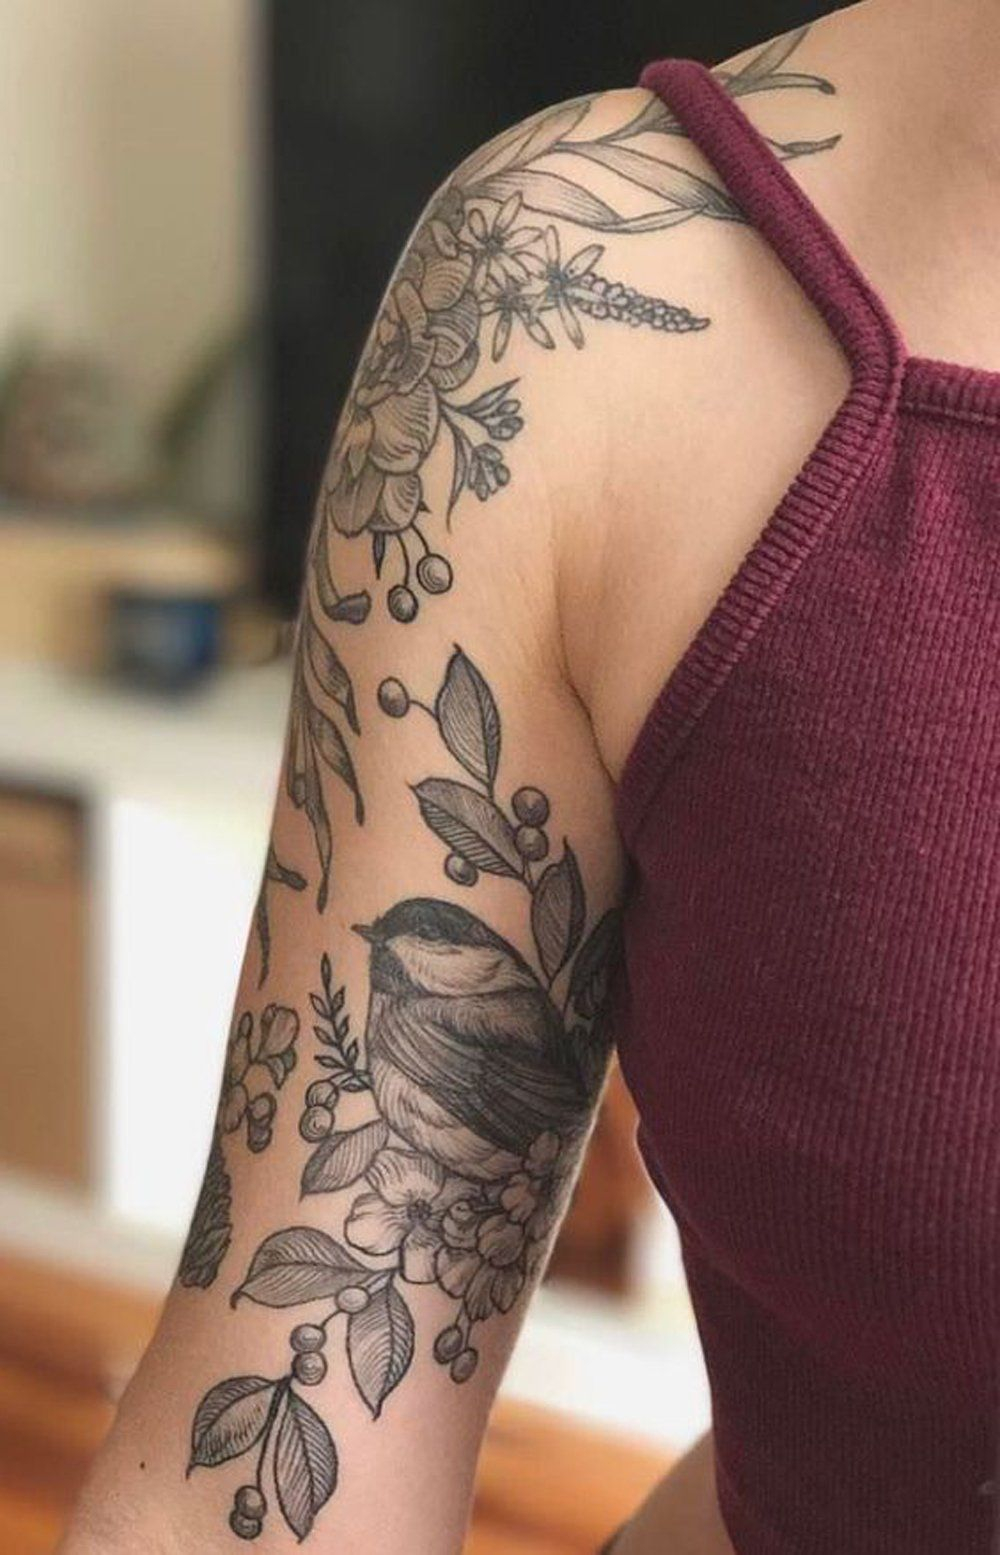 Girly Black Floral Flower Arm Sleeve Tattoo Ideas For Women throughout dimensions 1000 X 1555